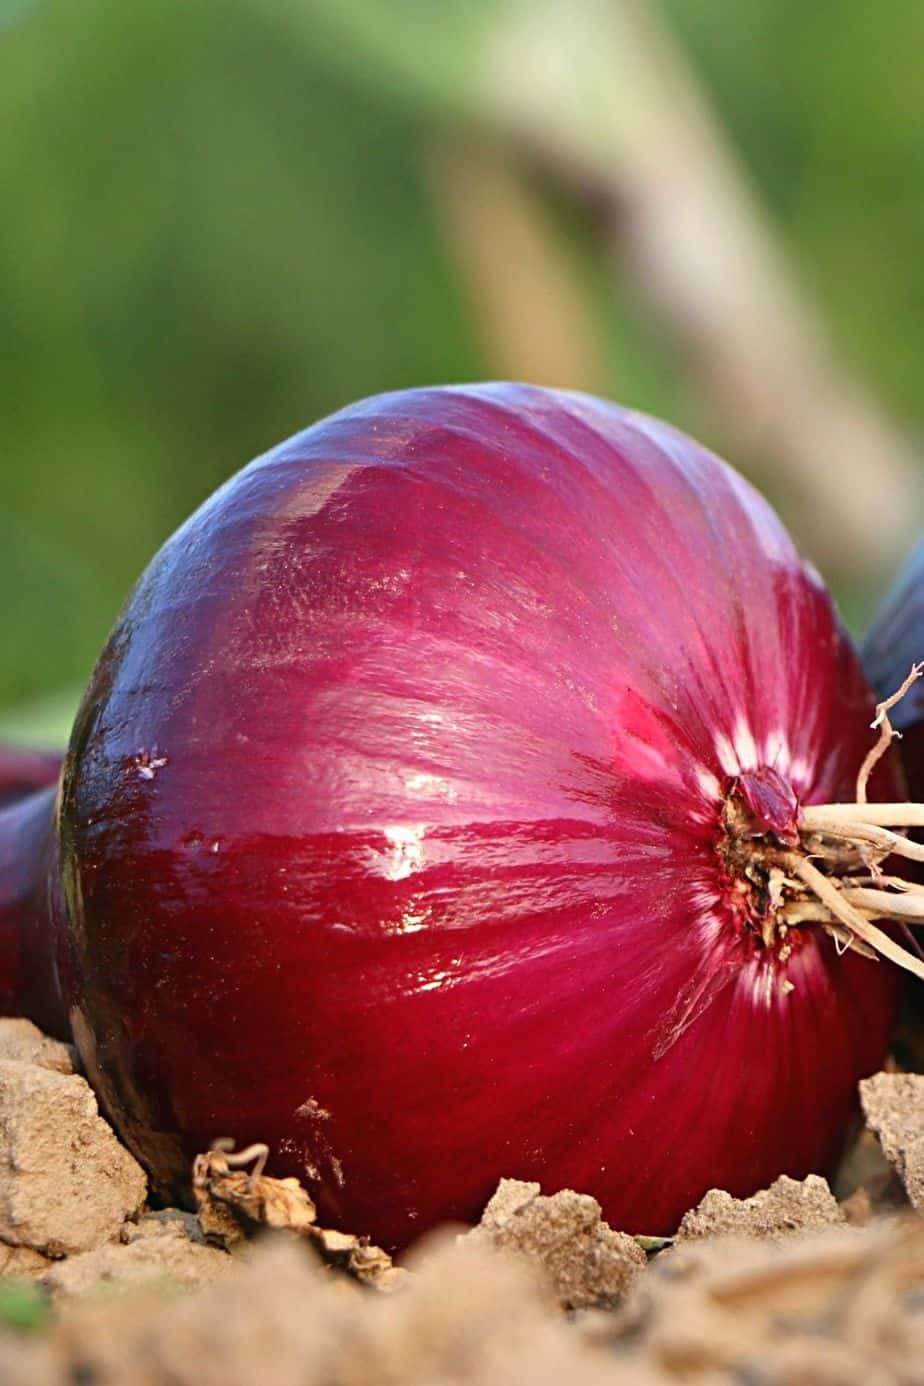 Onions, though they thrive in raised beds, need enough space both above and below the soil